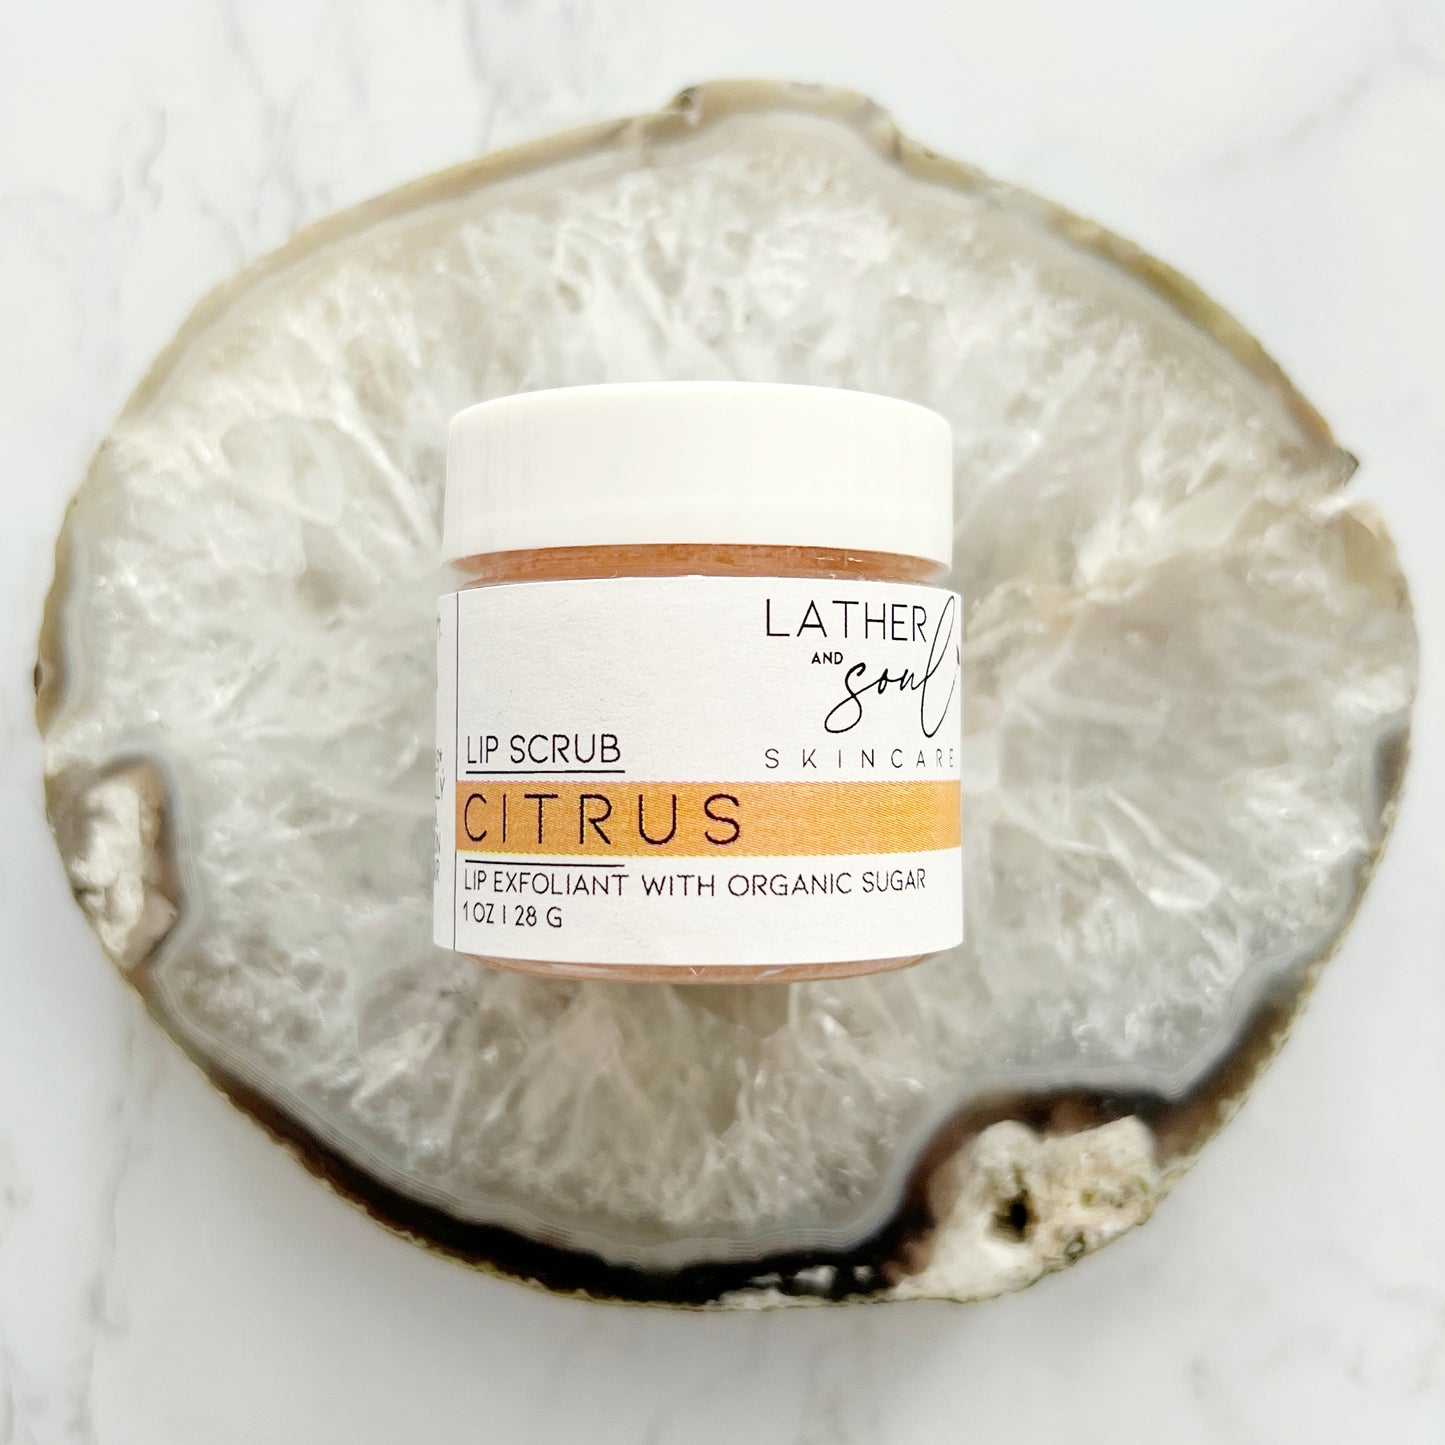 Citrus lip scrub made with organic ingredients by Lather + Soul.